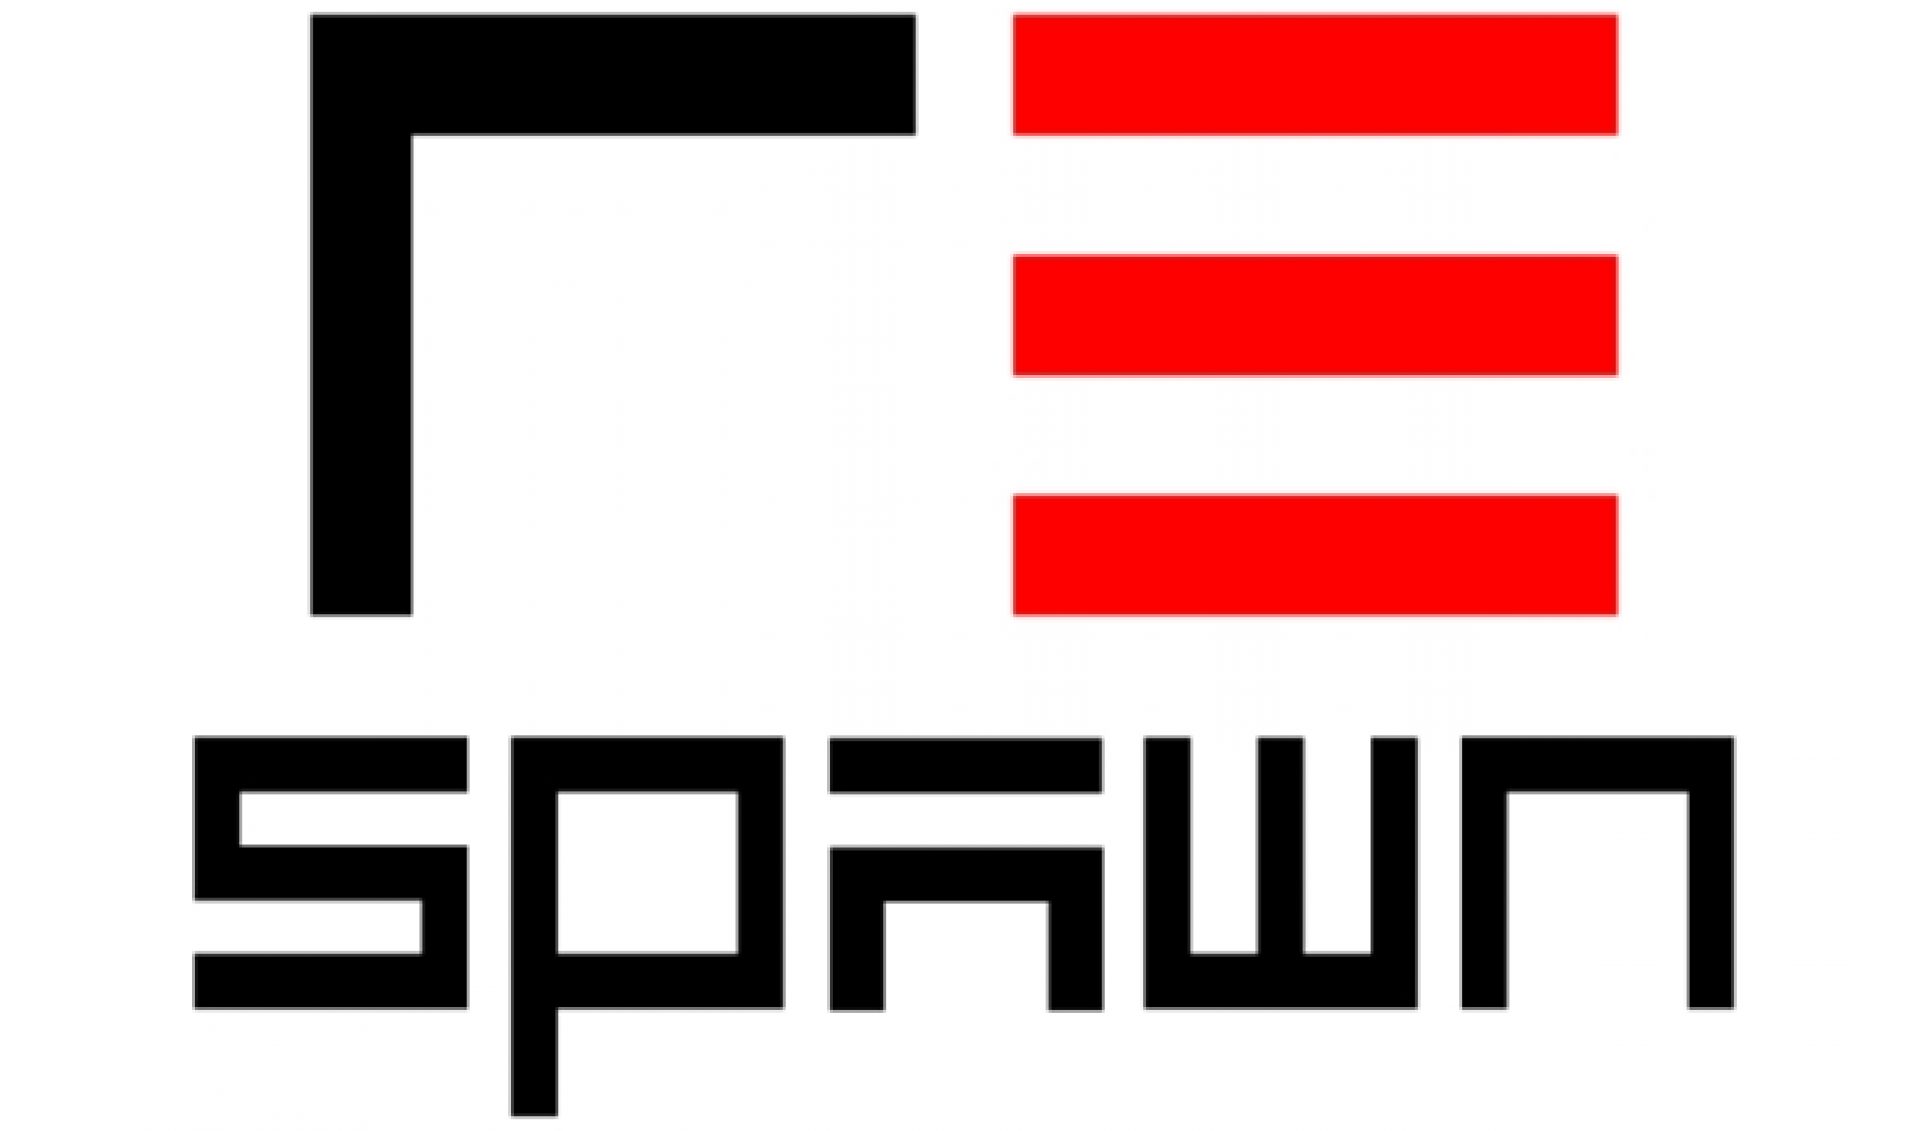 Machinima Lays Off 13 Employees, Will Shutter Respawn Channel